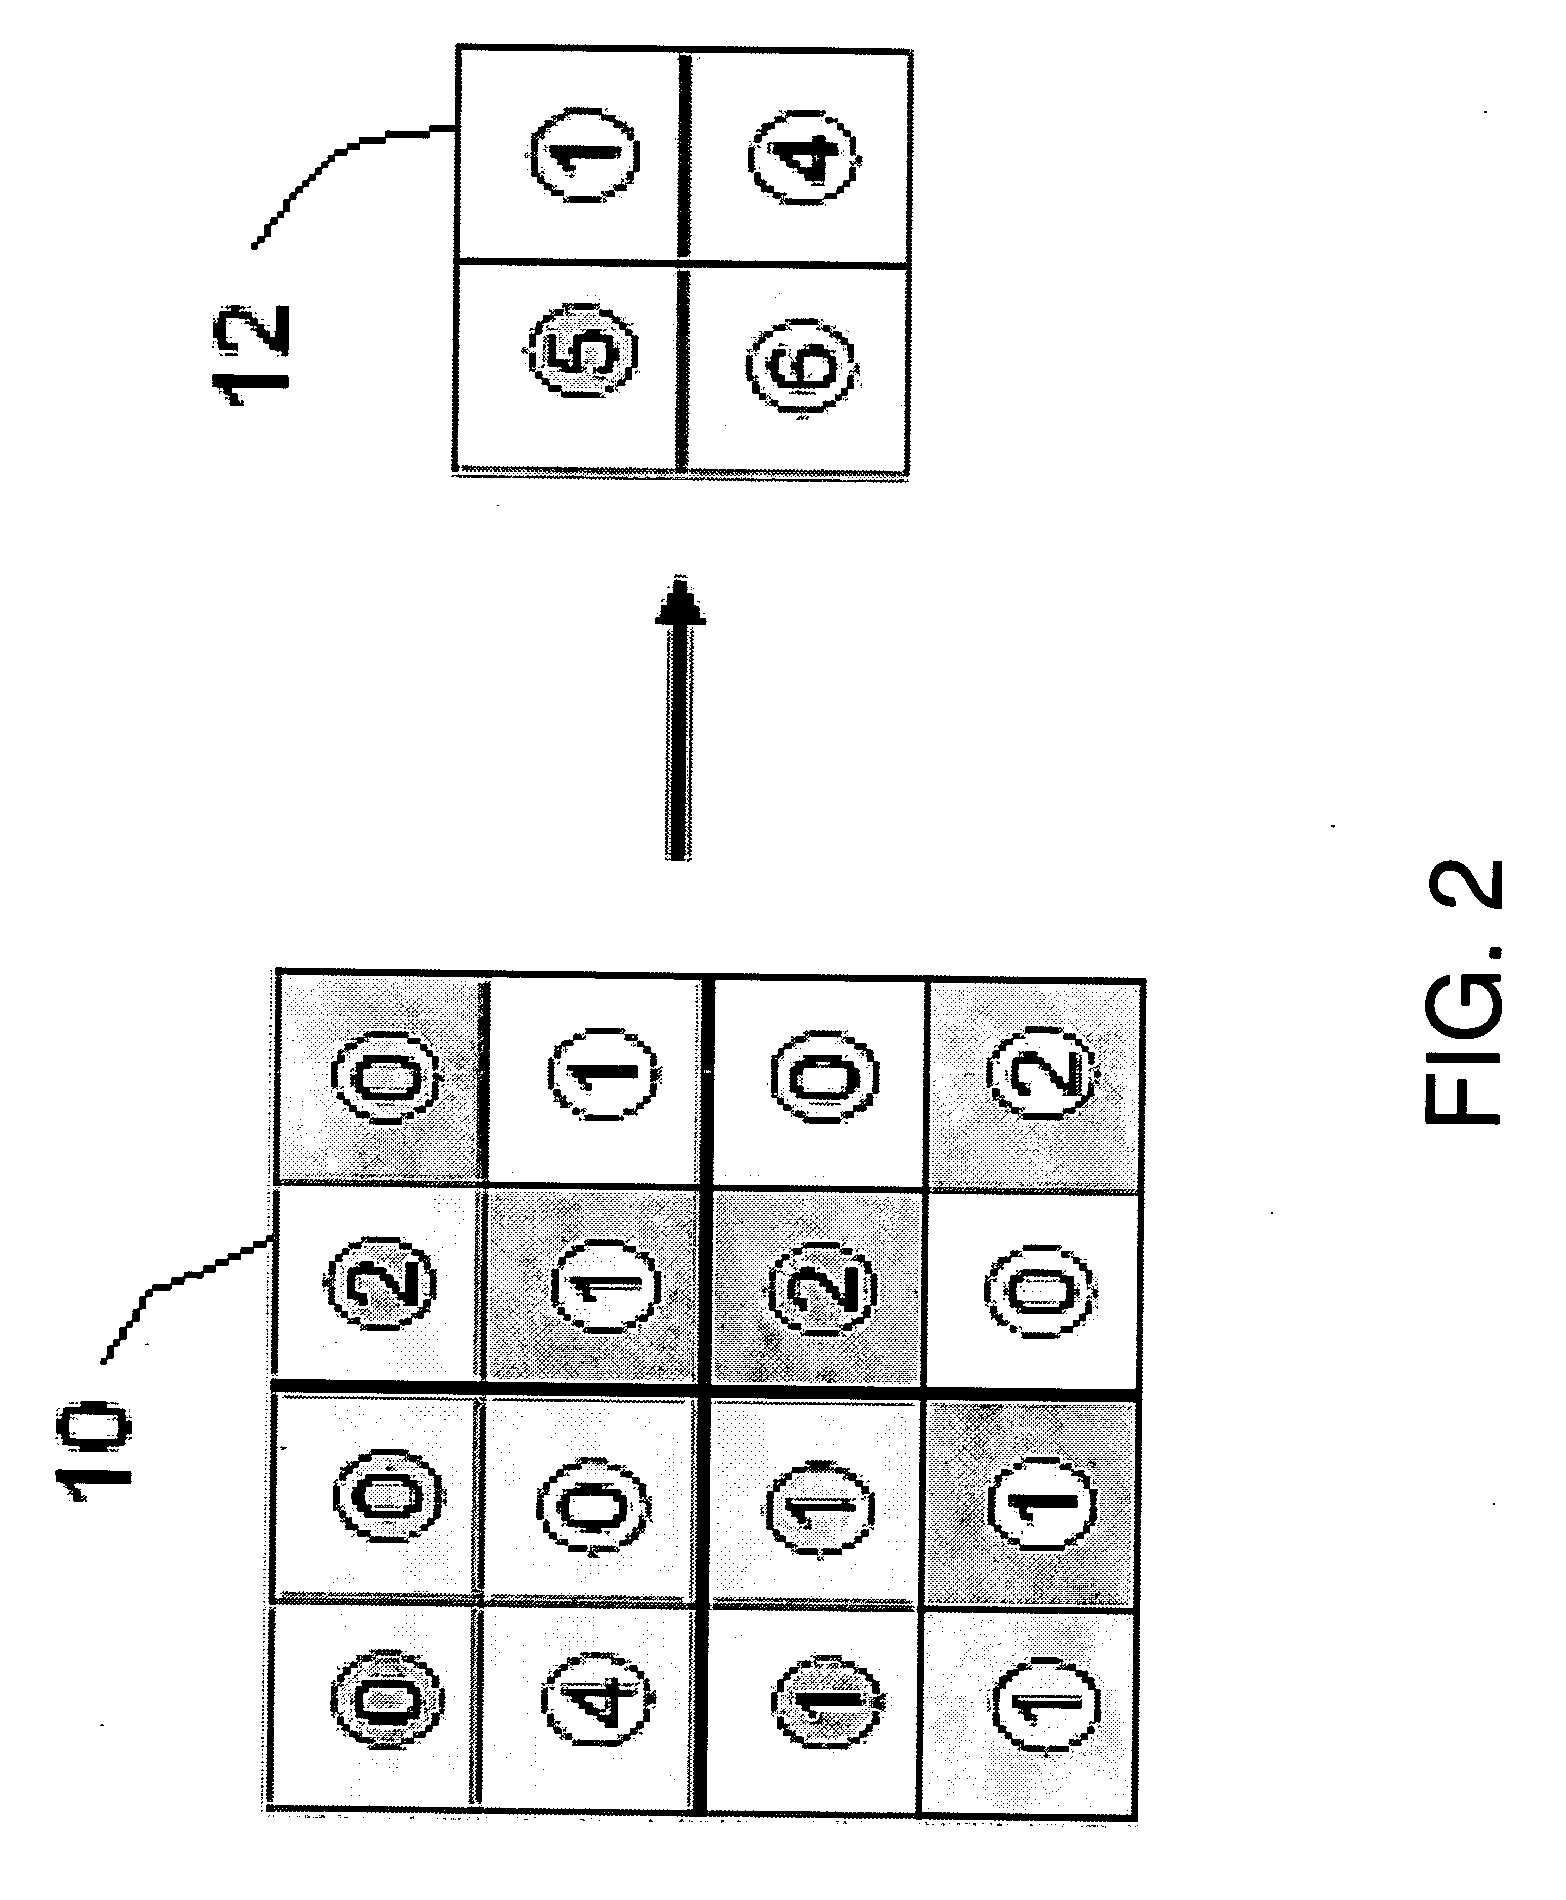 Method and system for histogram calculation using a graphics processing unit